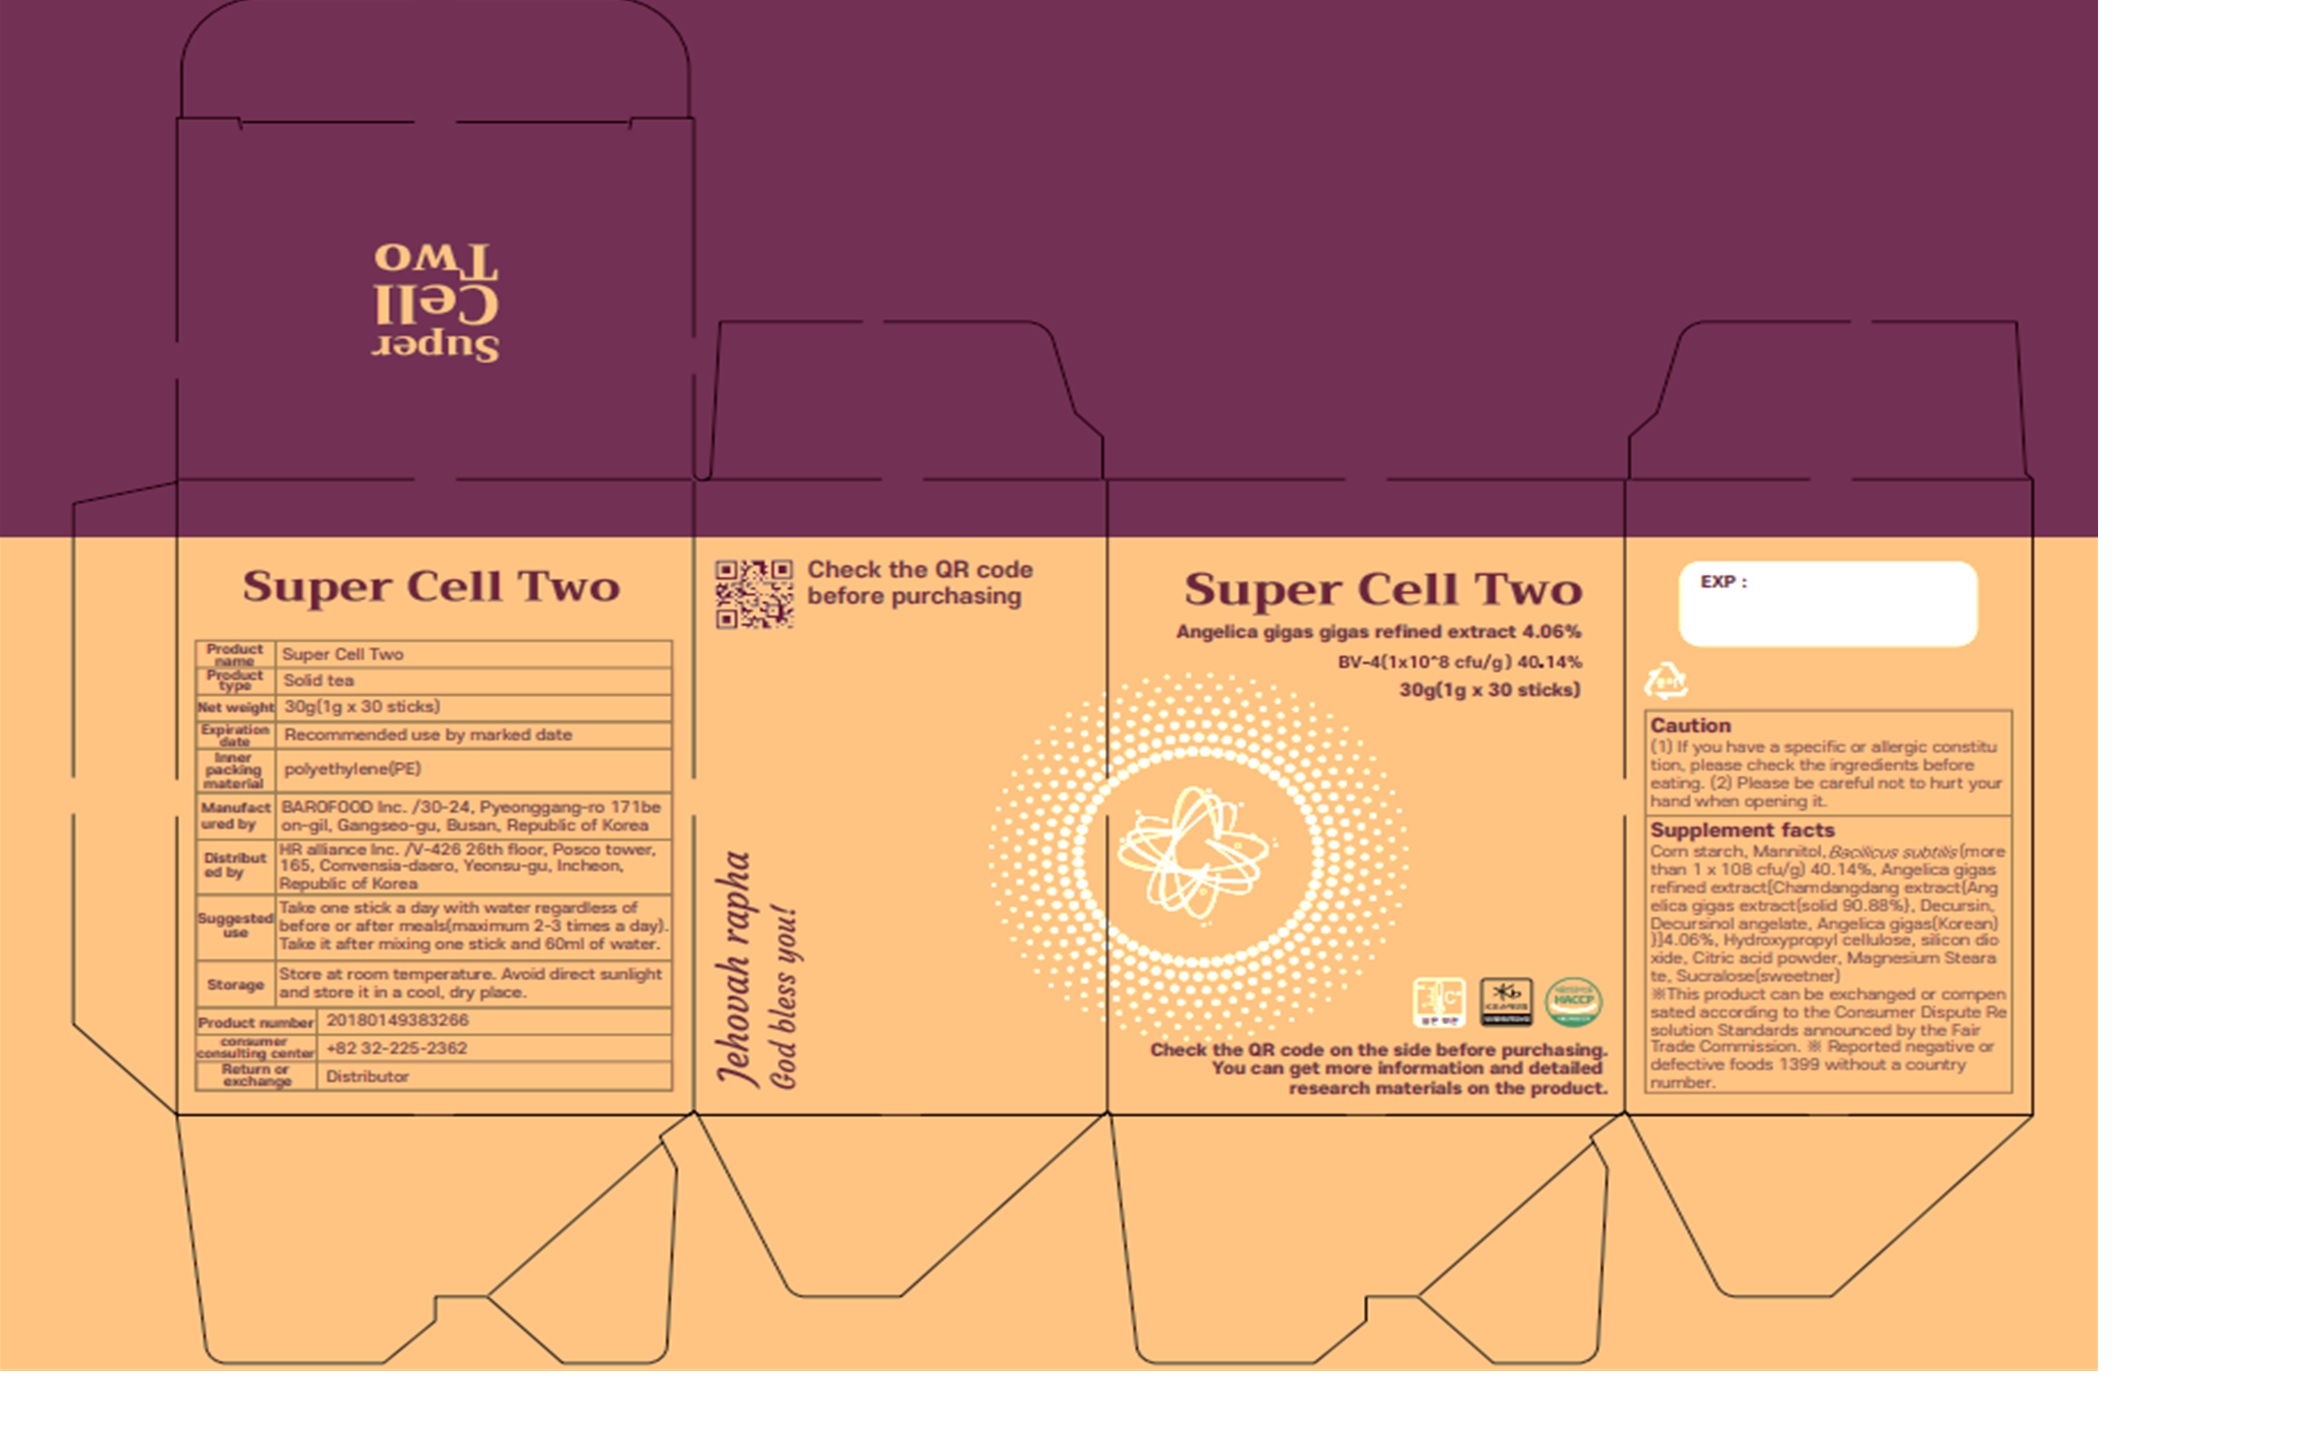 SUPER CELL TWO